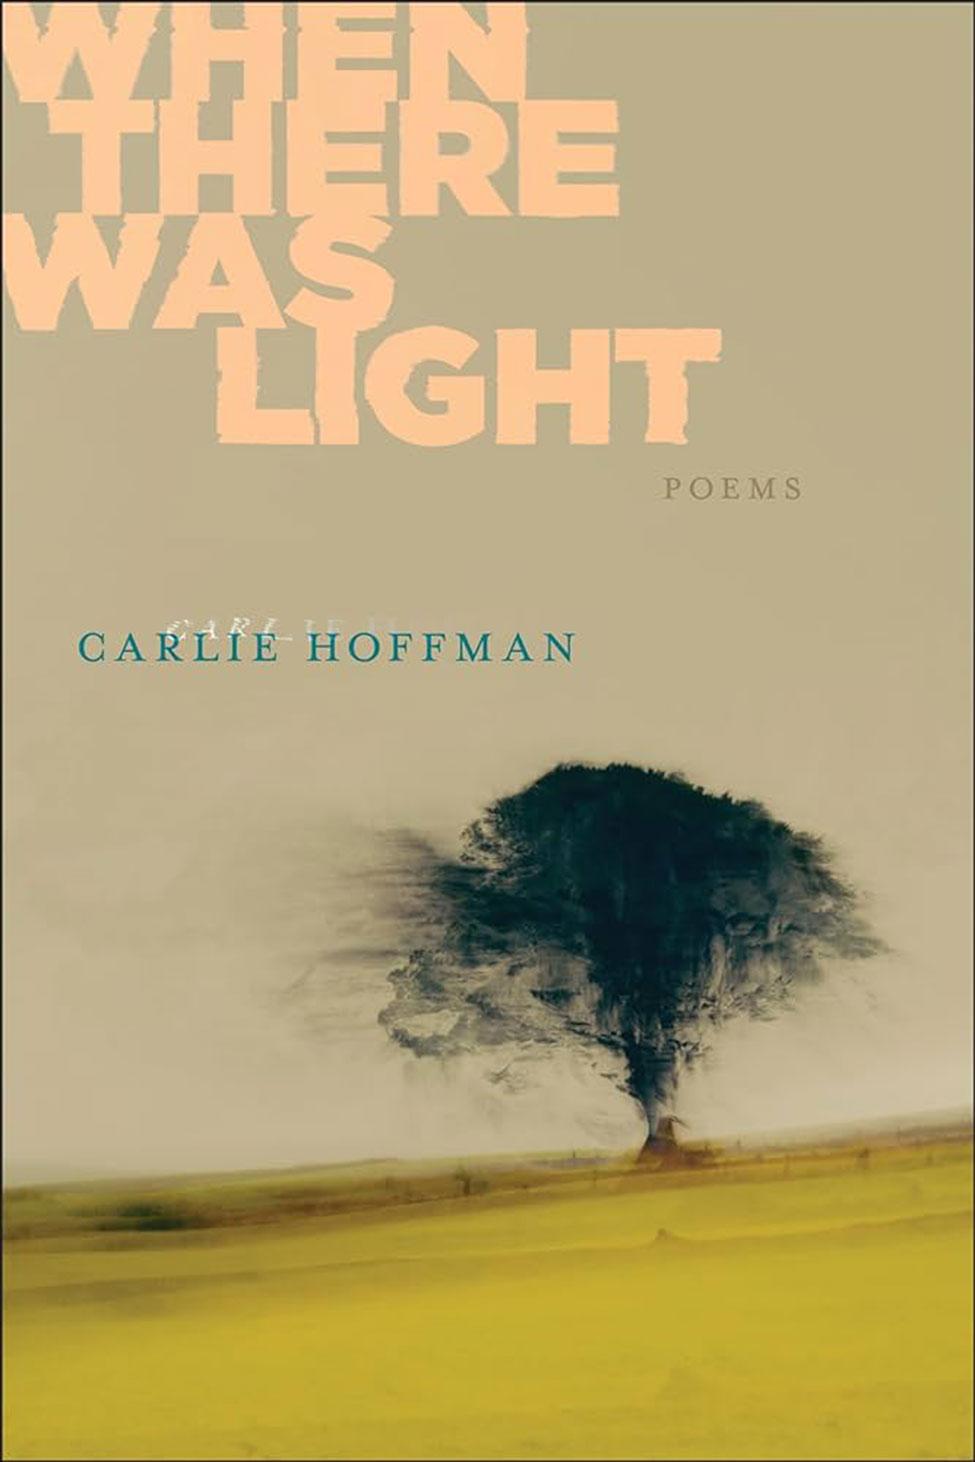 Pace University's Adjunct Professor of English Carlie Hoffman's book of poems called "When There Was Light"